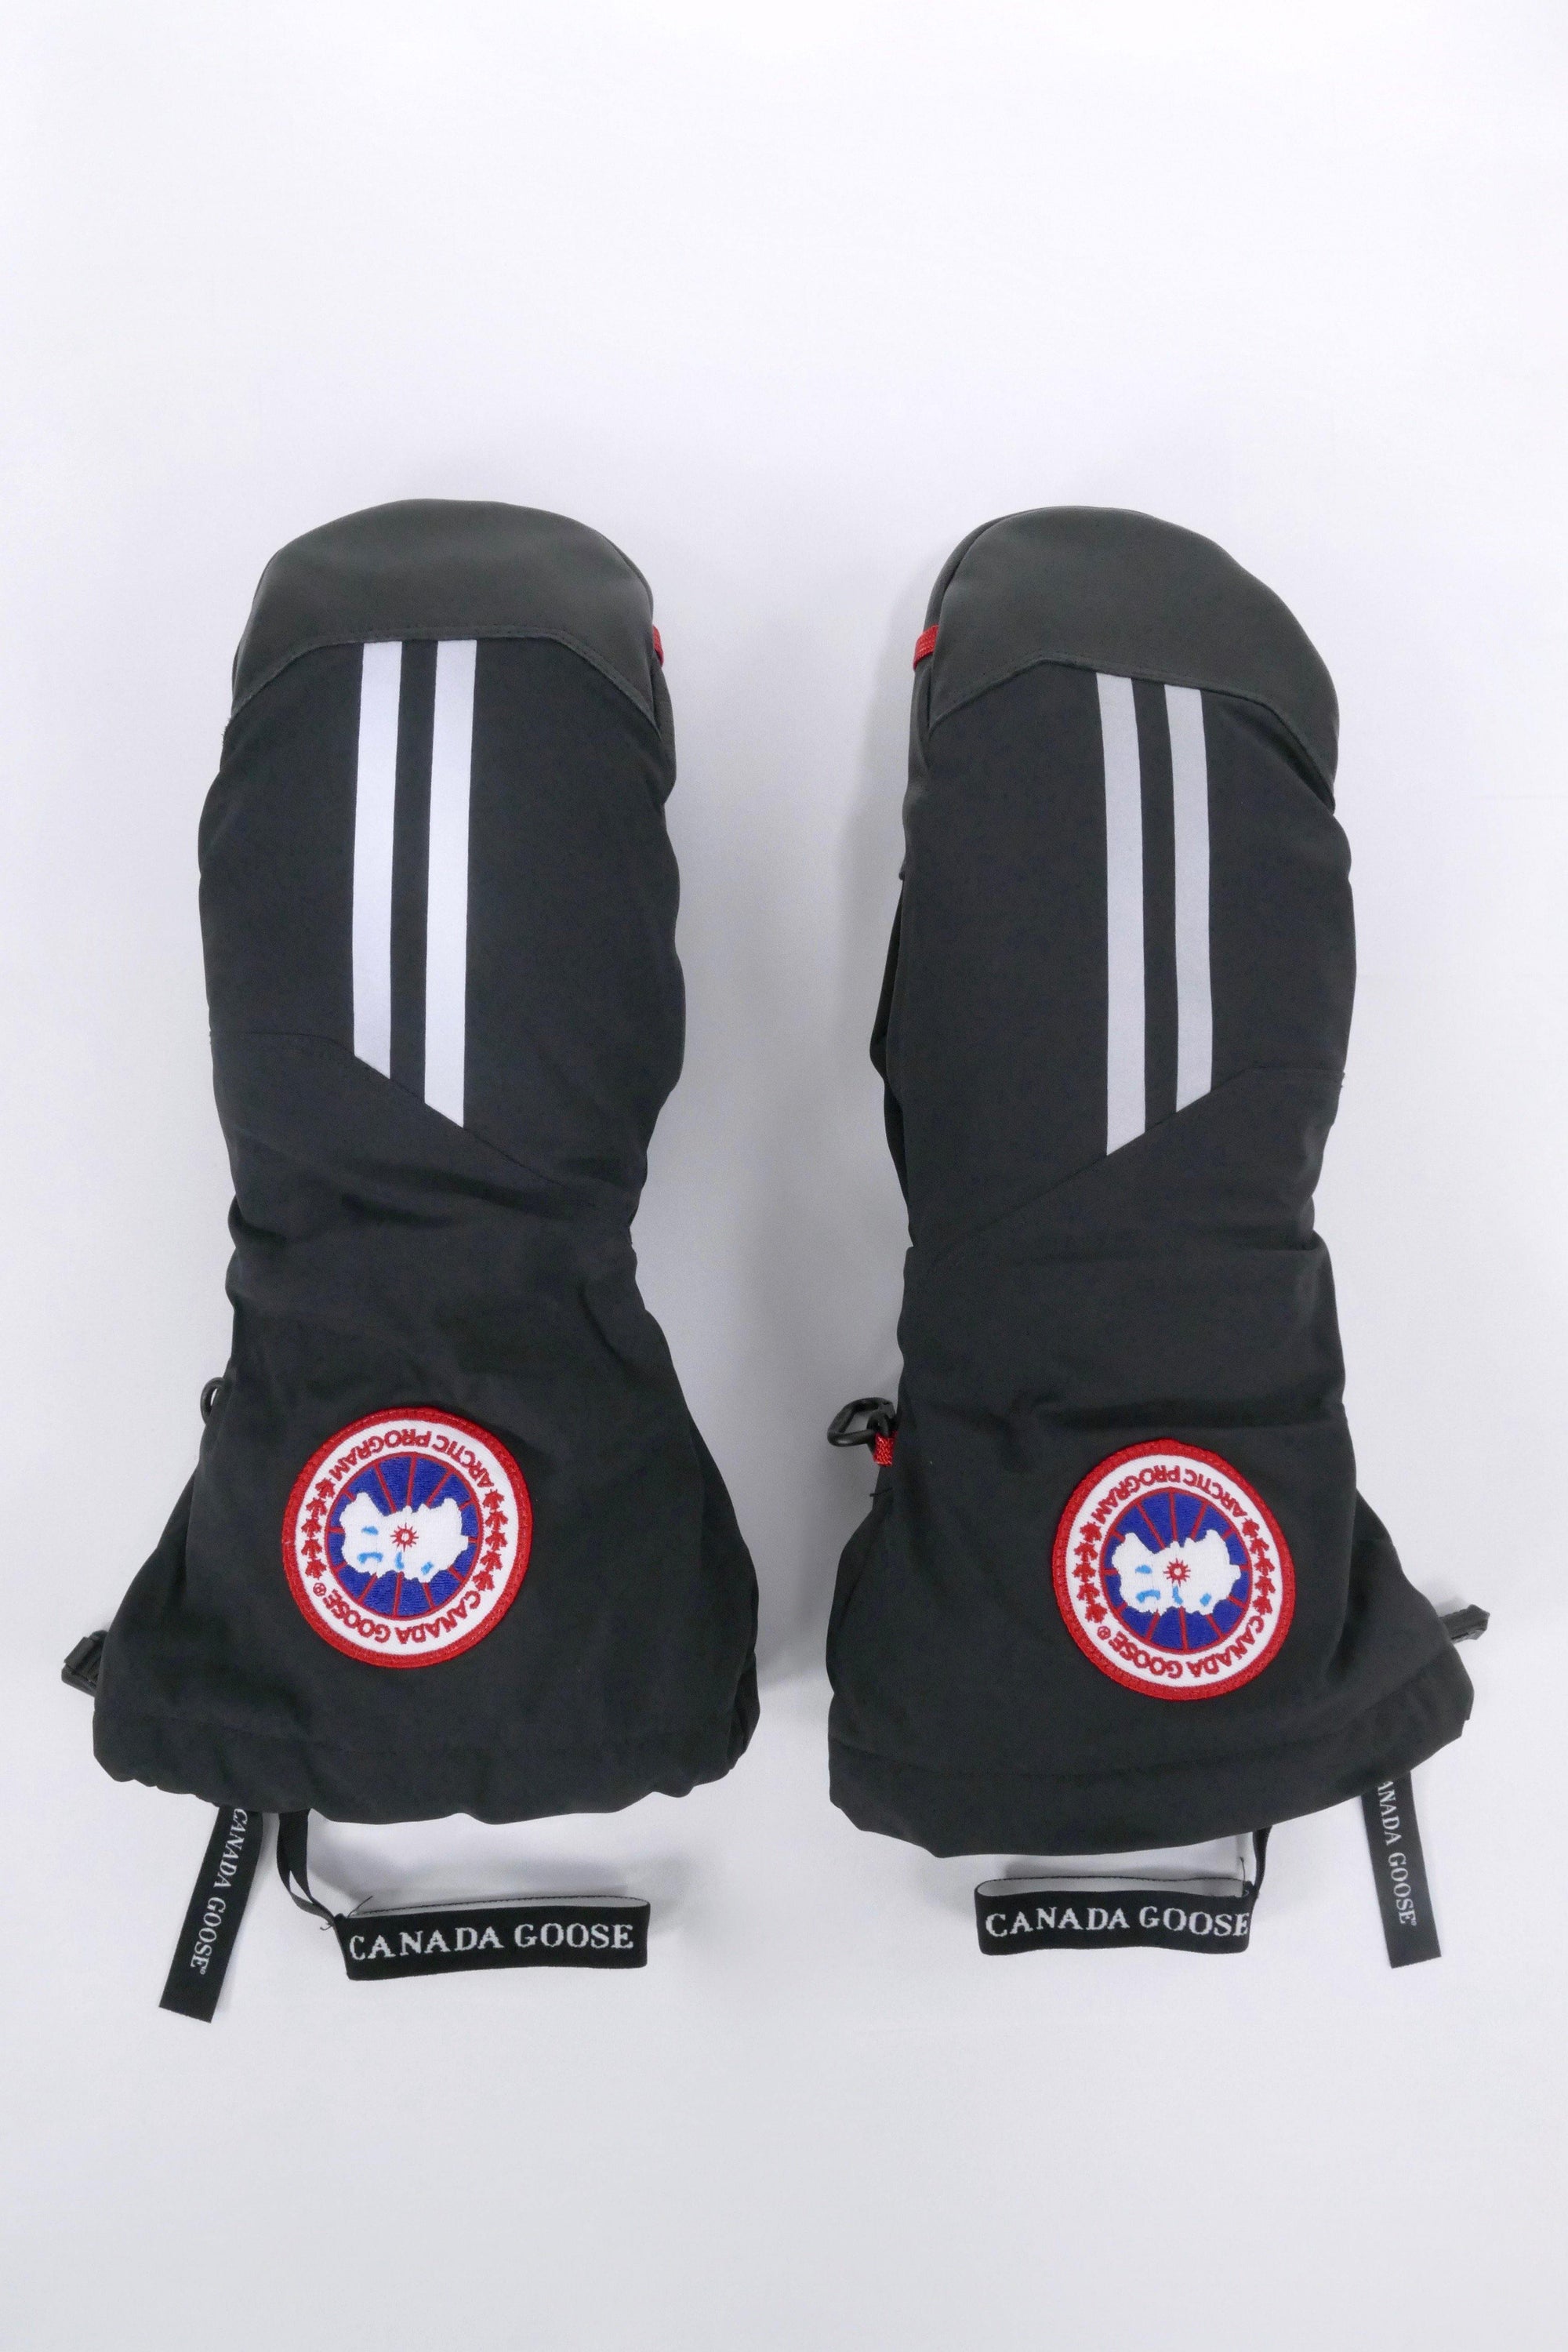 Canada Goose Mens Winter Accessories Gloves & Mitts Snow Mantra Mitts  - Black - Due West